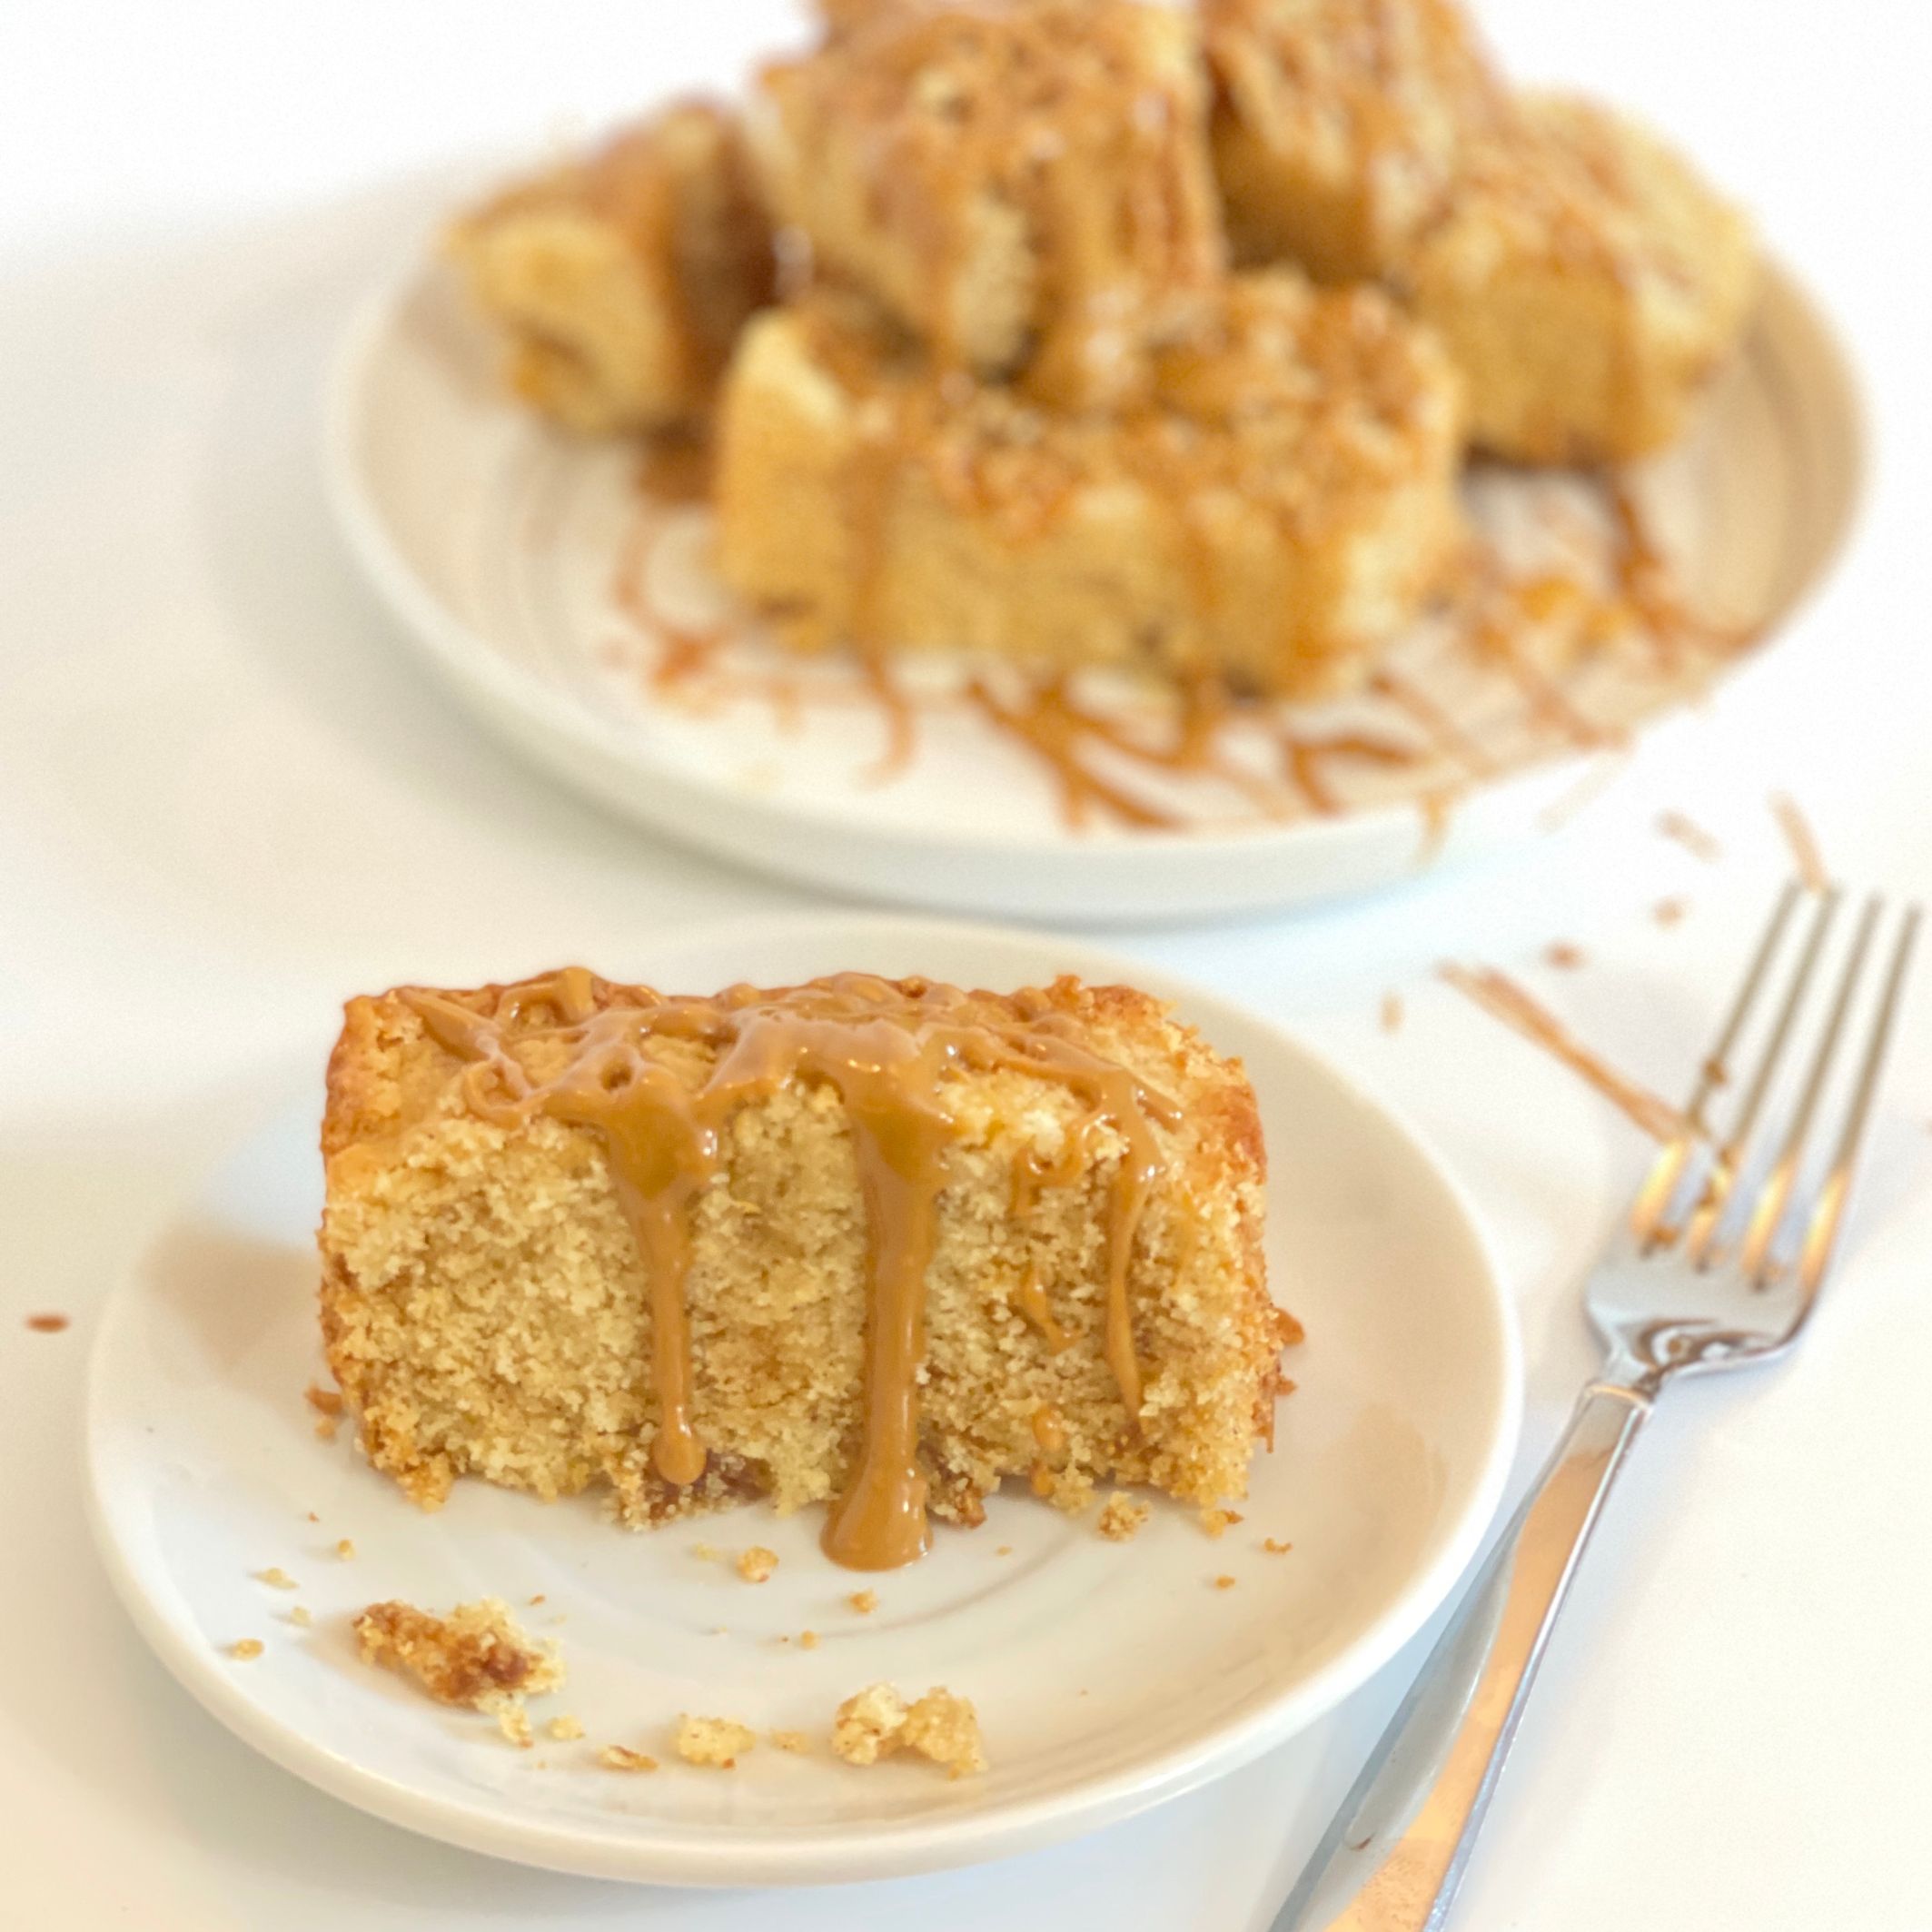 Peanut Butter Loaf Cake Slice on a Plate With Fork